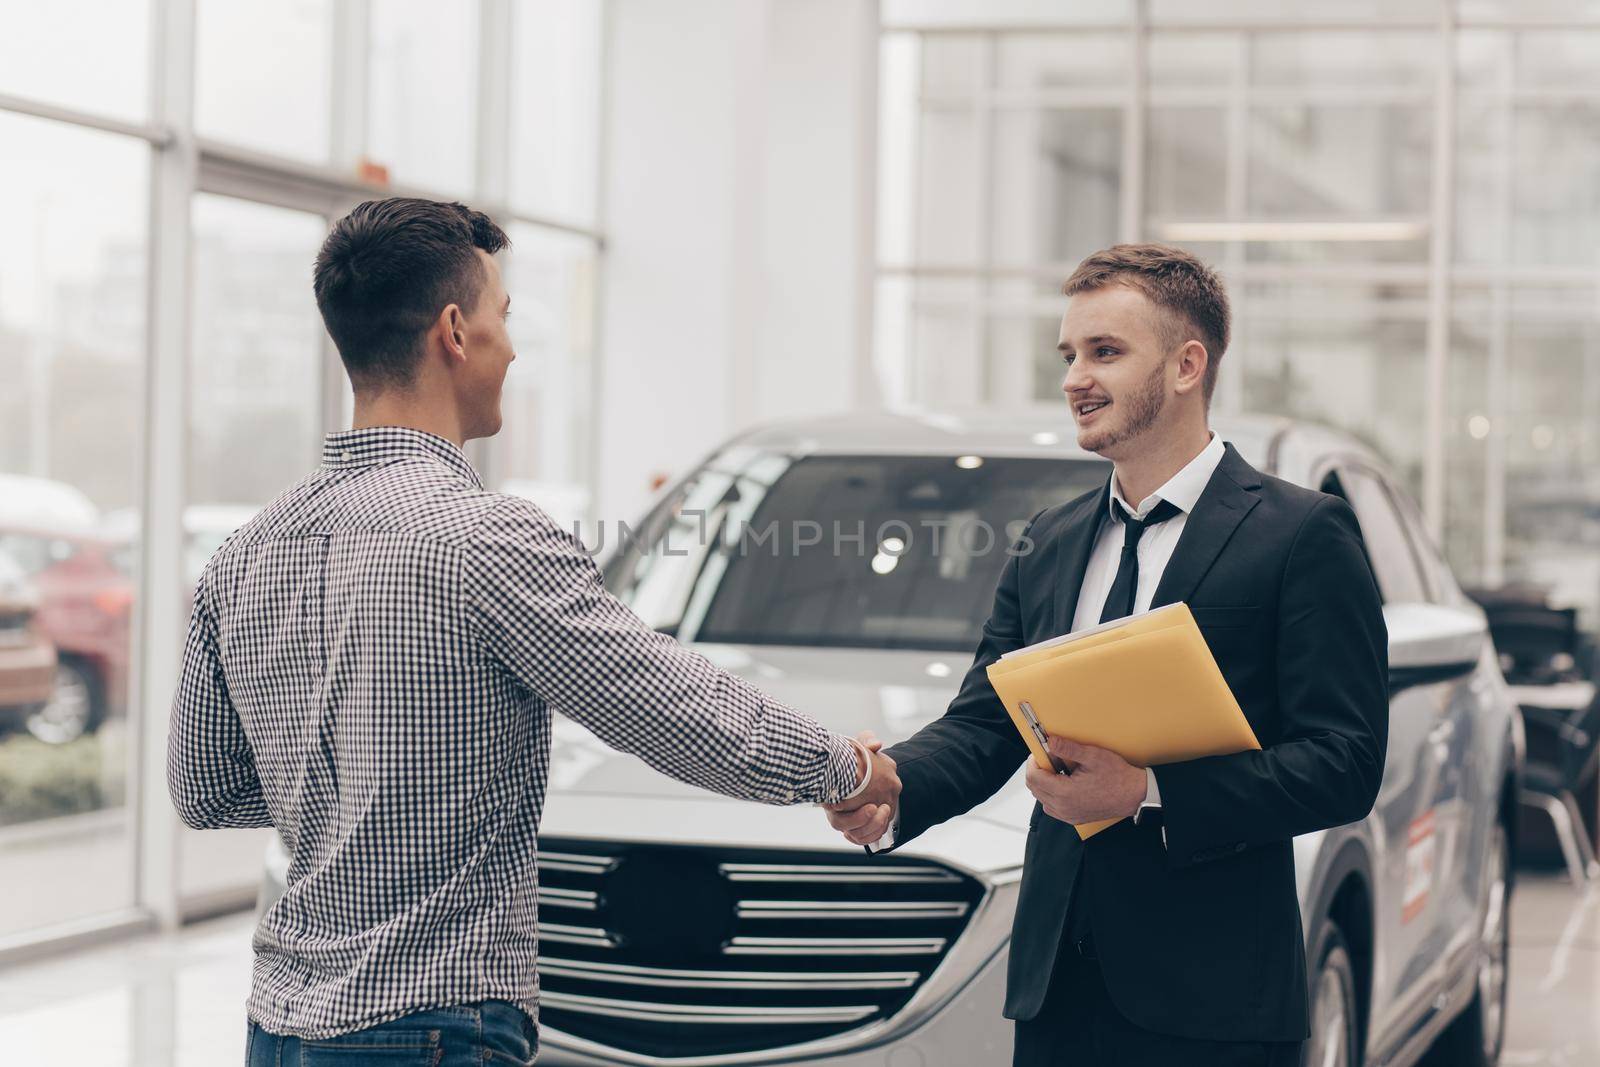 Professional car salesman smiling, shaking hands with his male customer in front of a new automobile. Man buying new car at the salon, shaking hands with salesperson. Service, occupation concept